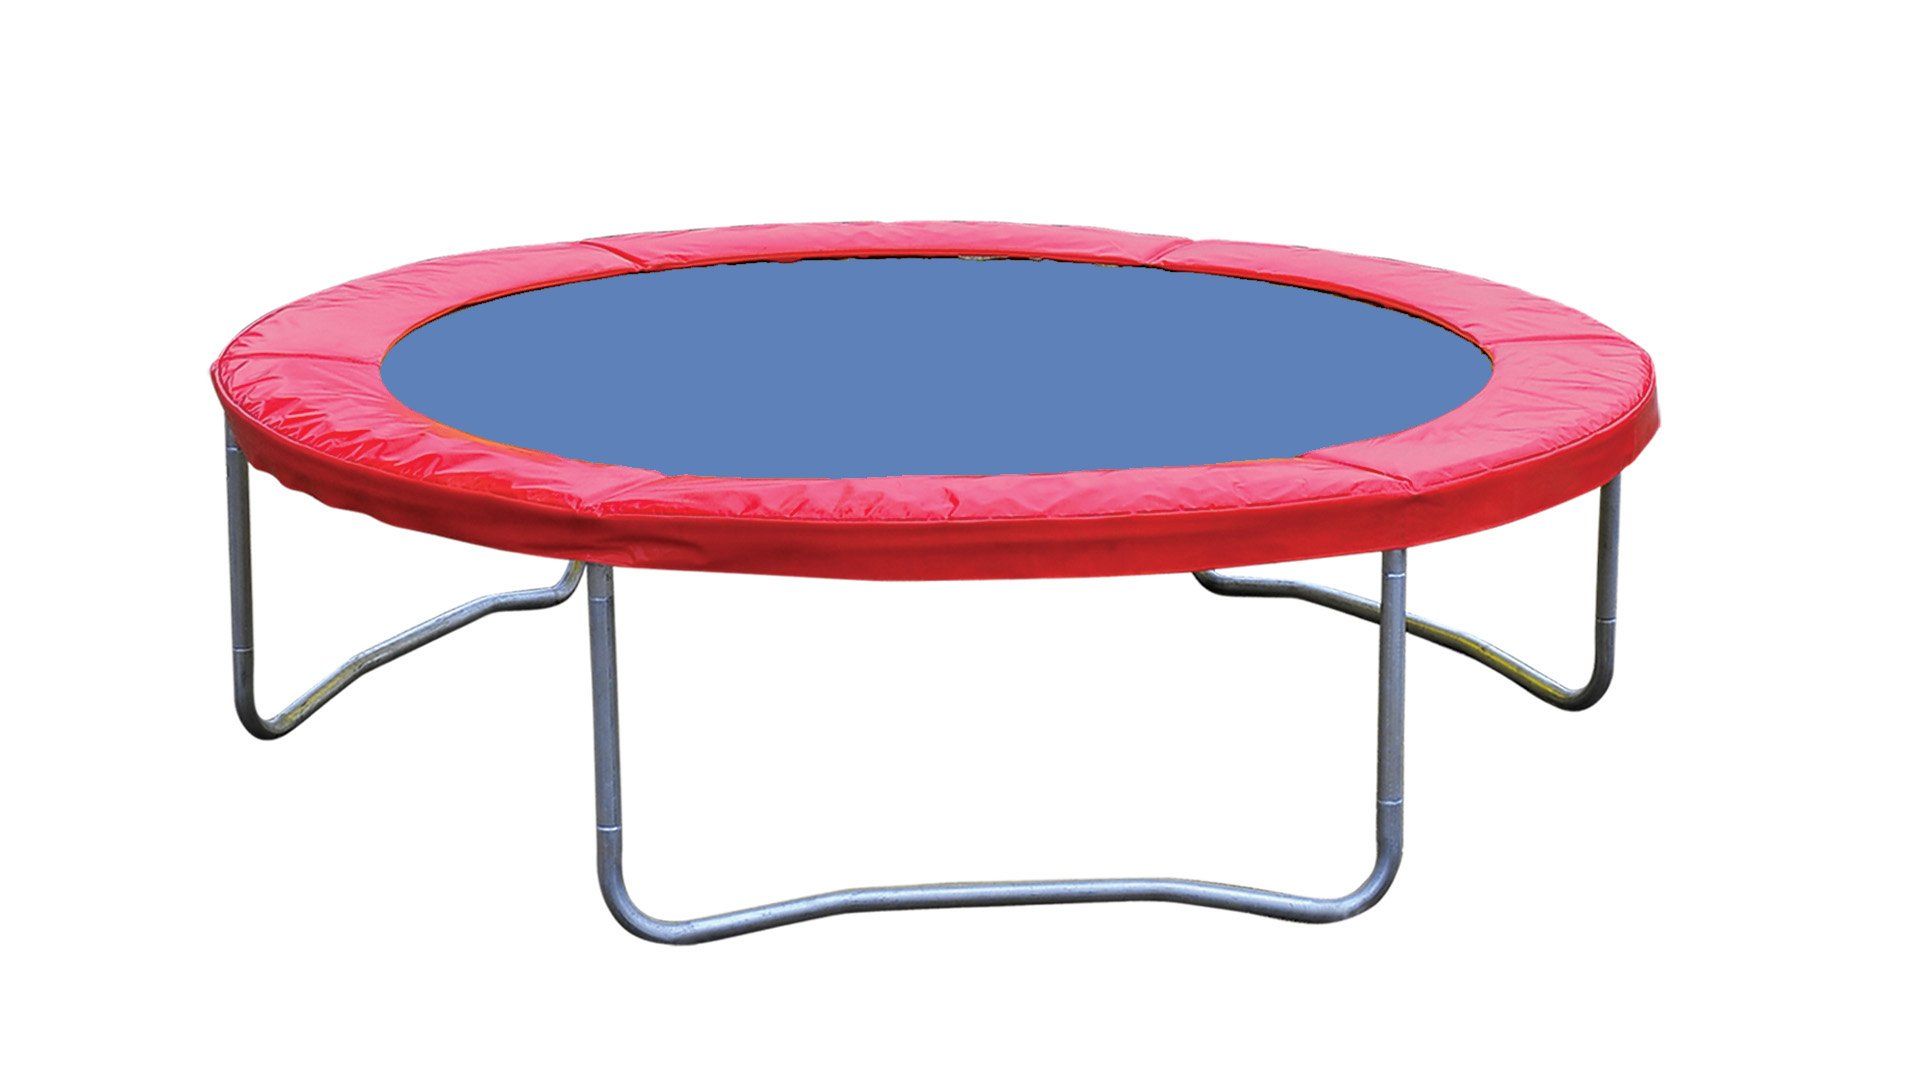 V Brand New Airzone 2.4 m Trampoline (colours may vary) ISP71.99 (Ebay)